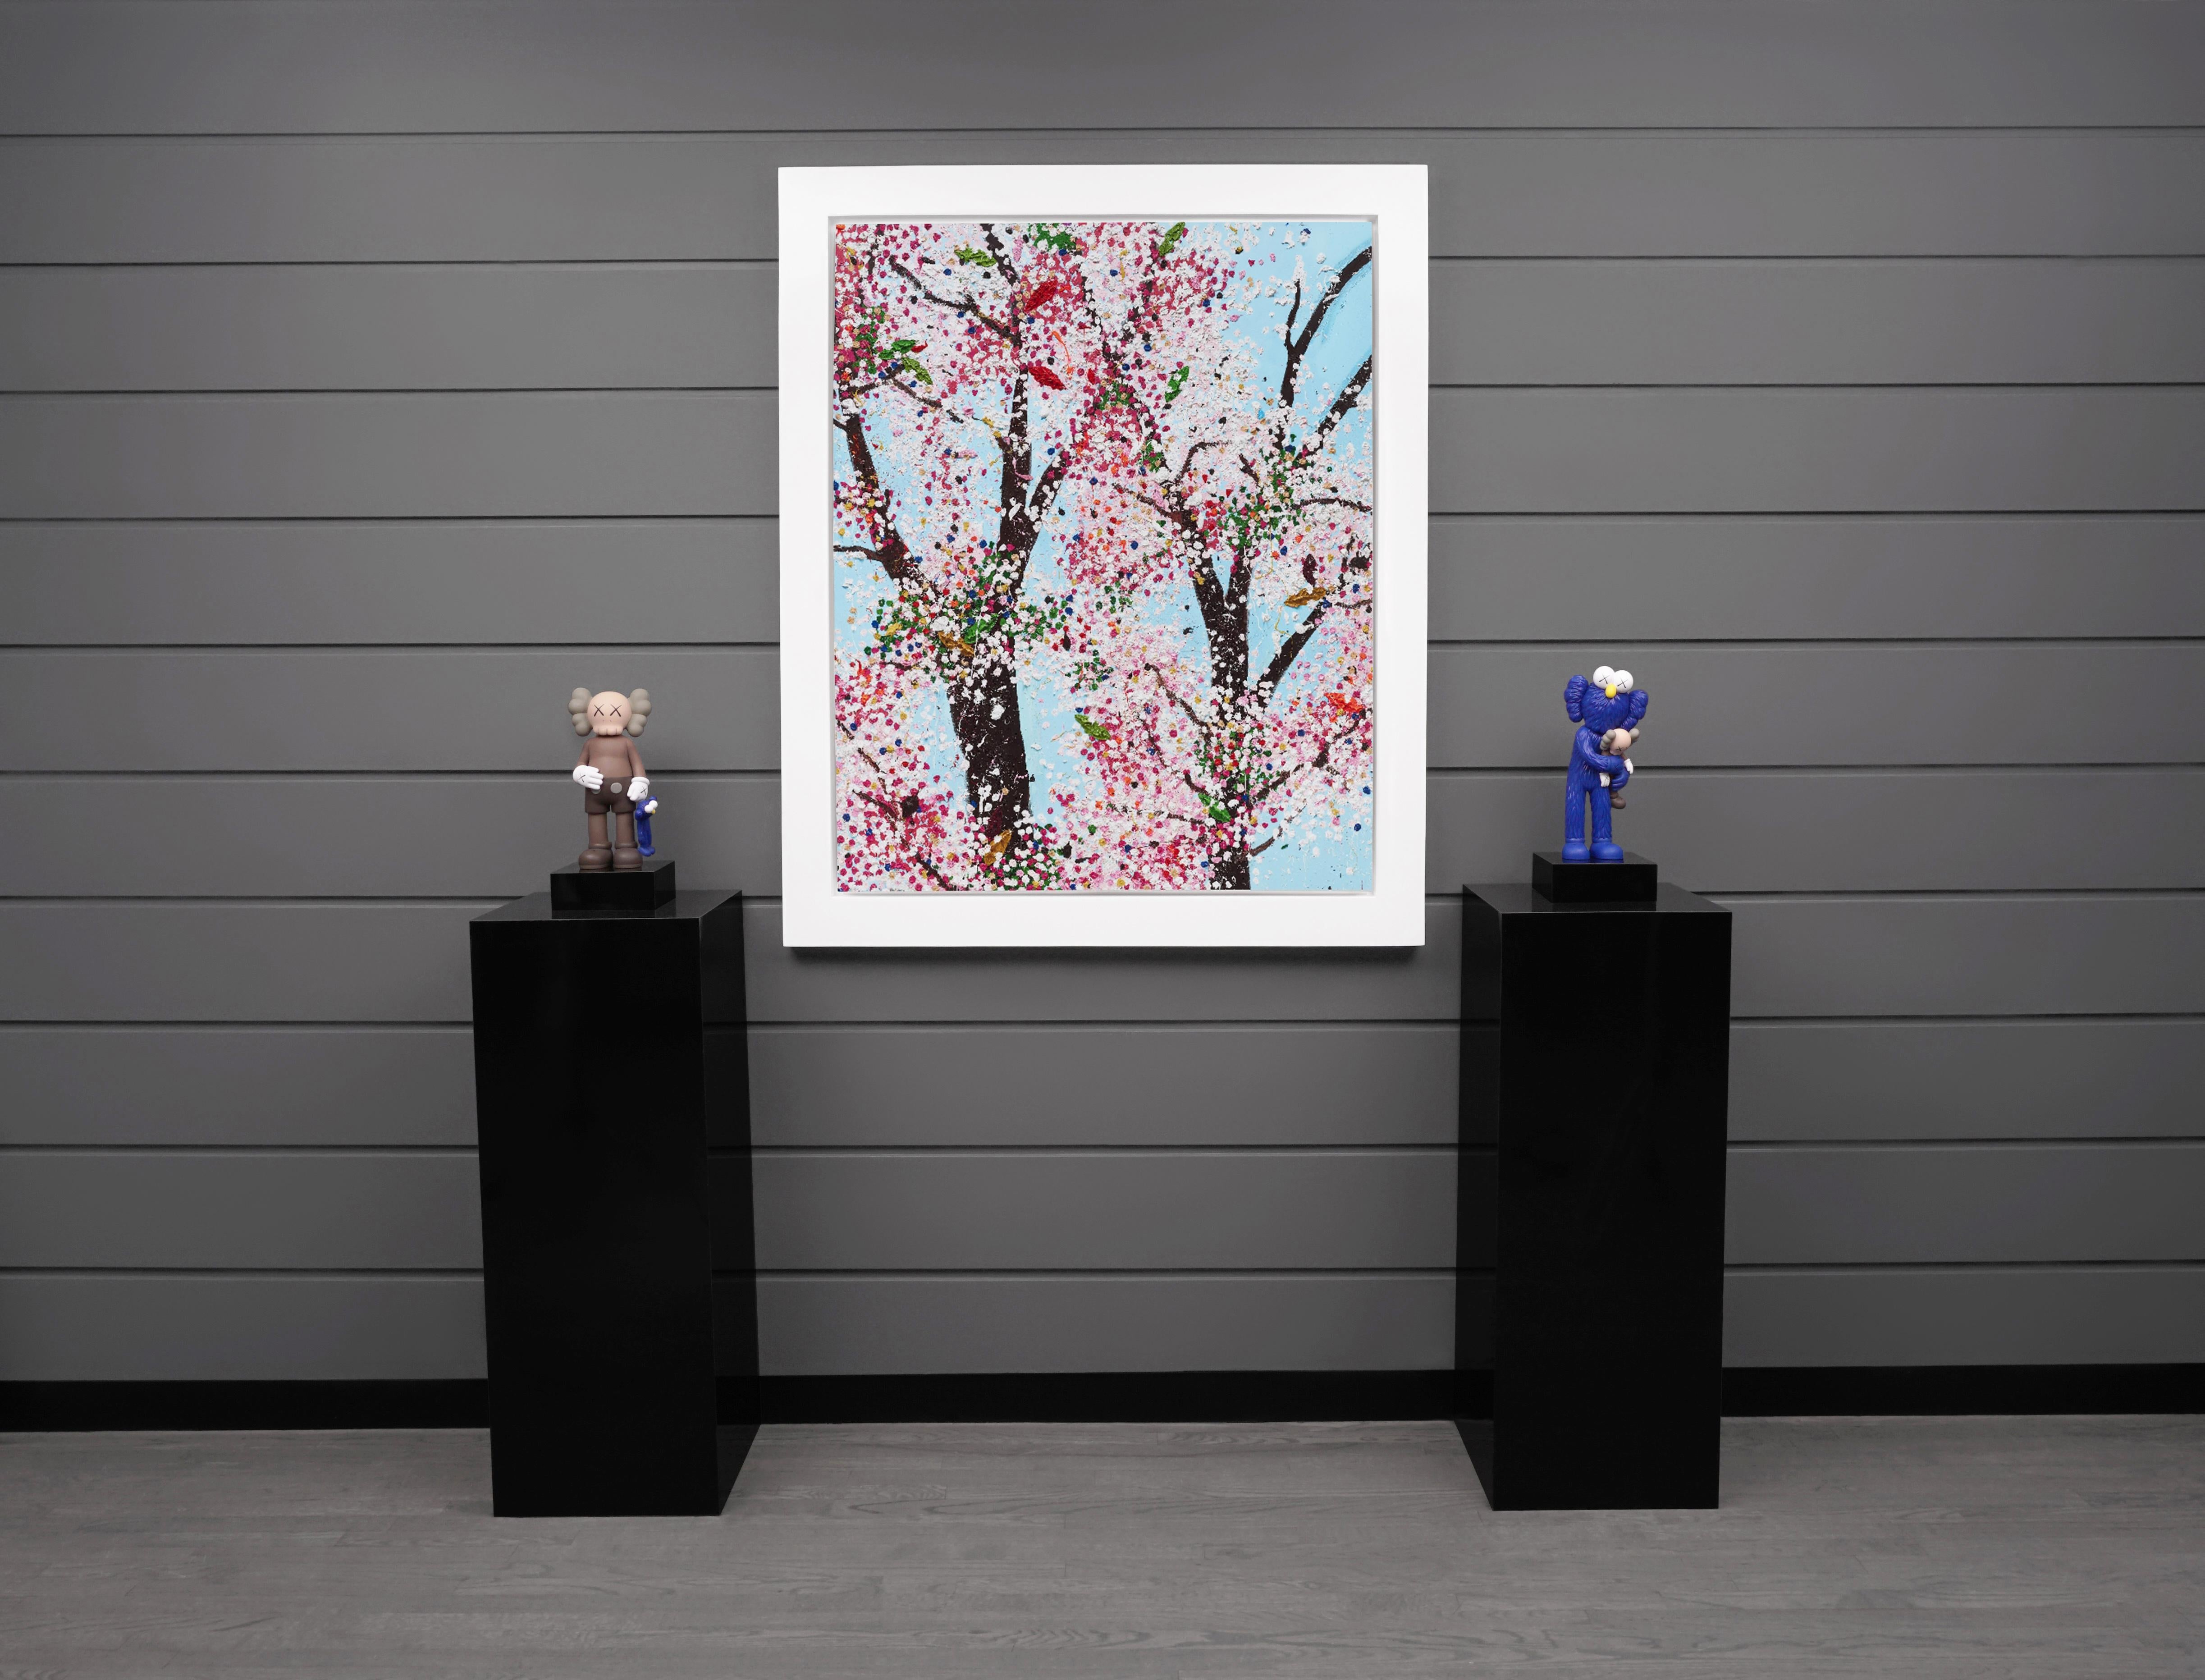 The Virtues 'Honesty', Limited Edition 'Cherry Blossom' Landscape, 2021 - Print by Damien Hirst